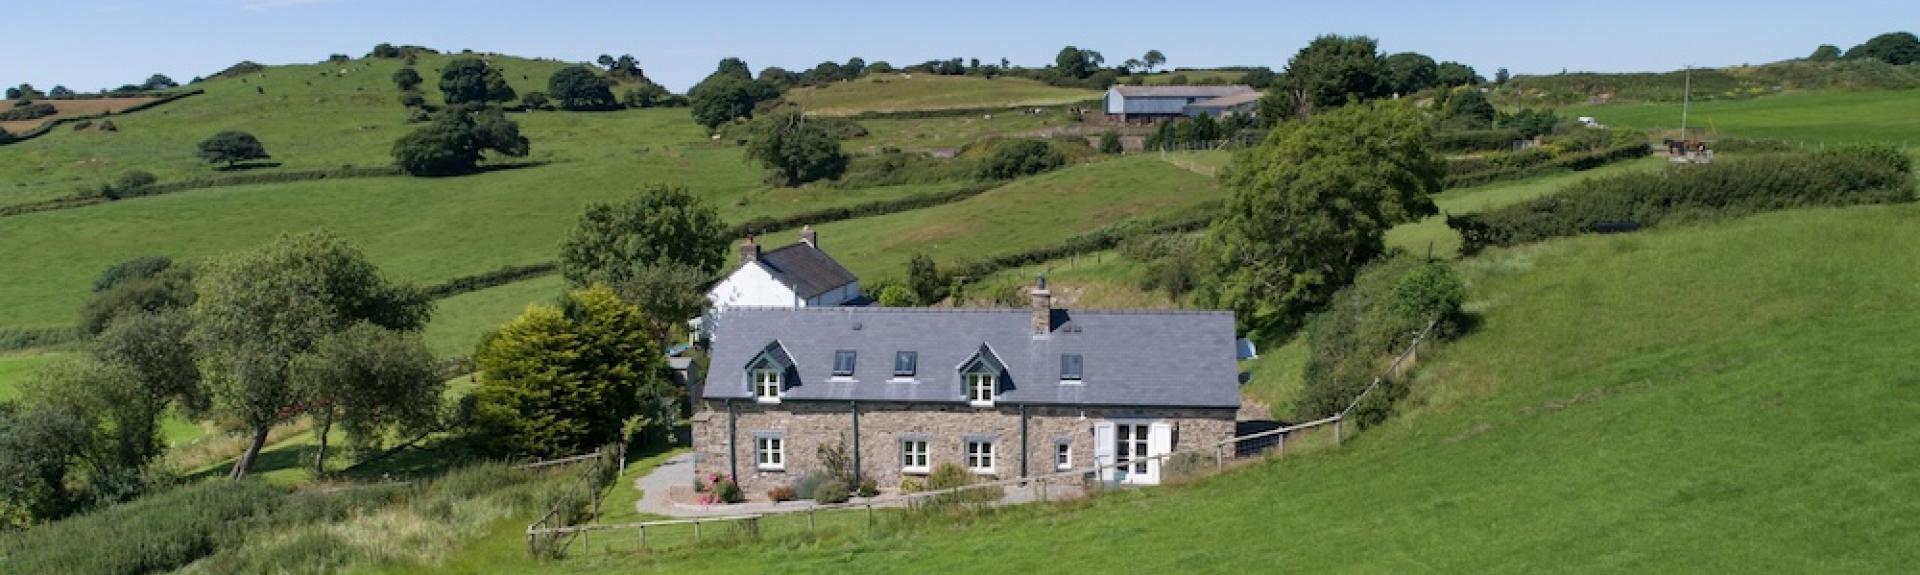 A 2-storey stone-built holiday cottage nestles in a fold a rural landscape.